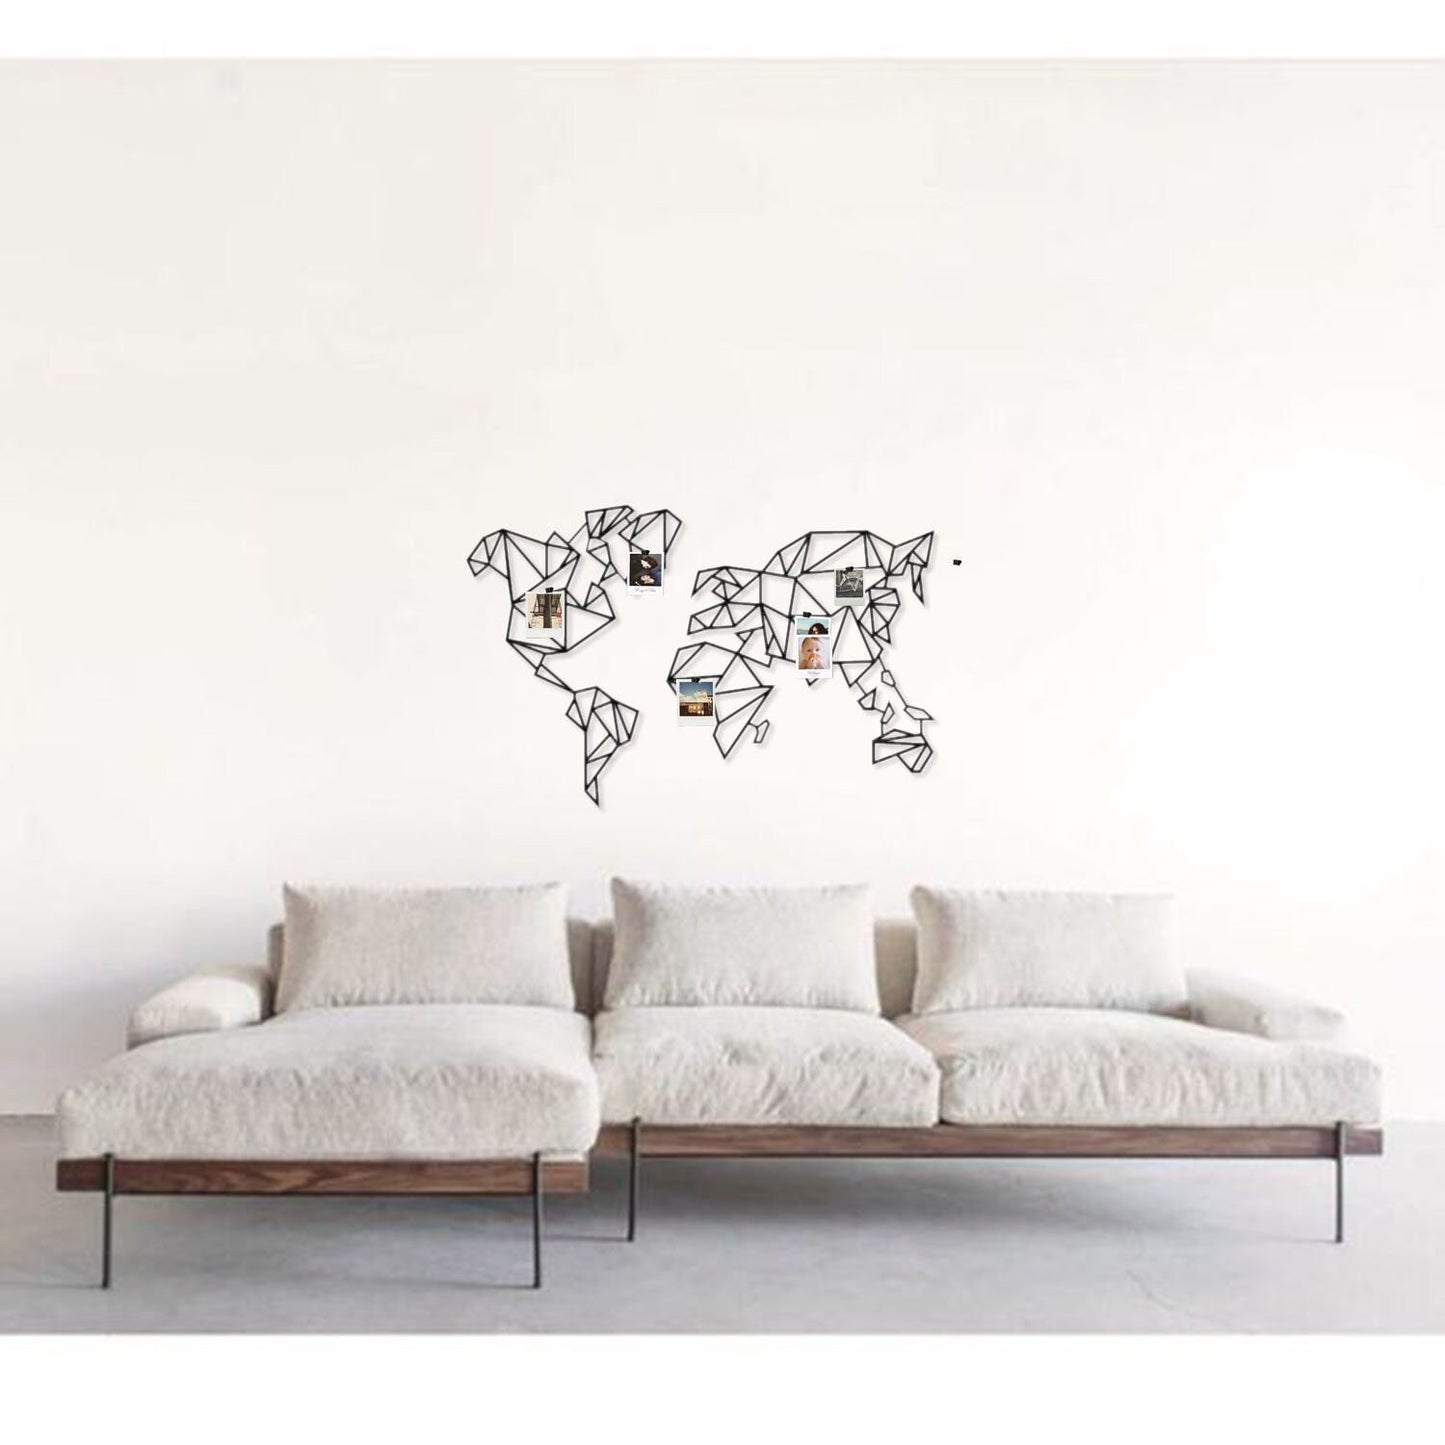 World Map Metal Wall Art, Large Office Wall Decor, Modern Office Wall Art, Large Map for Wall, New Office Gift